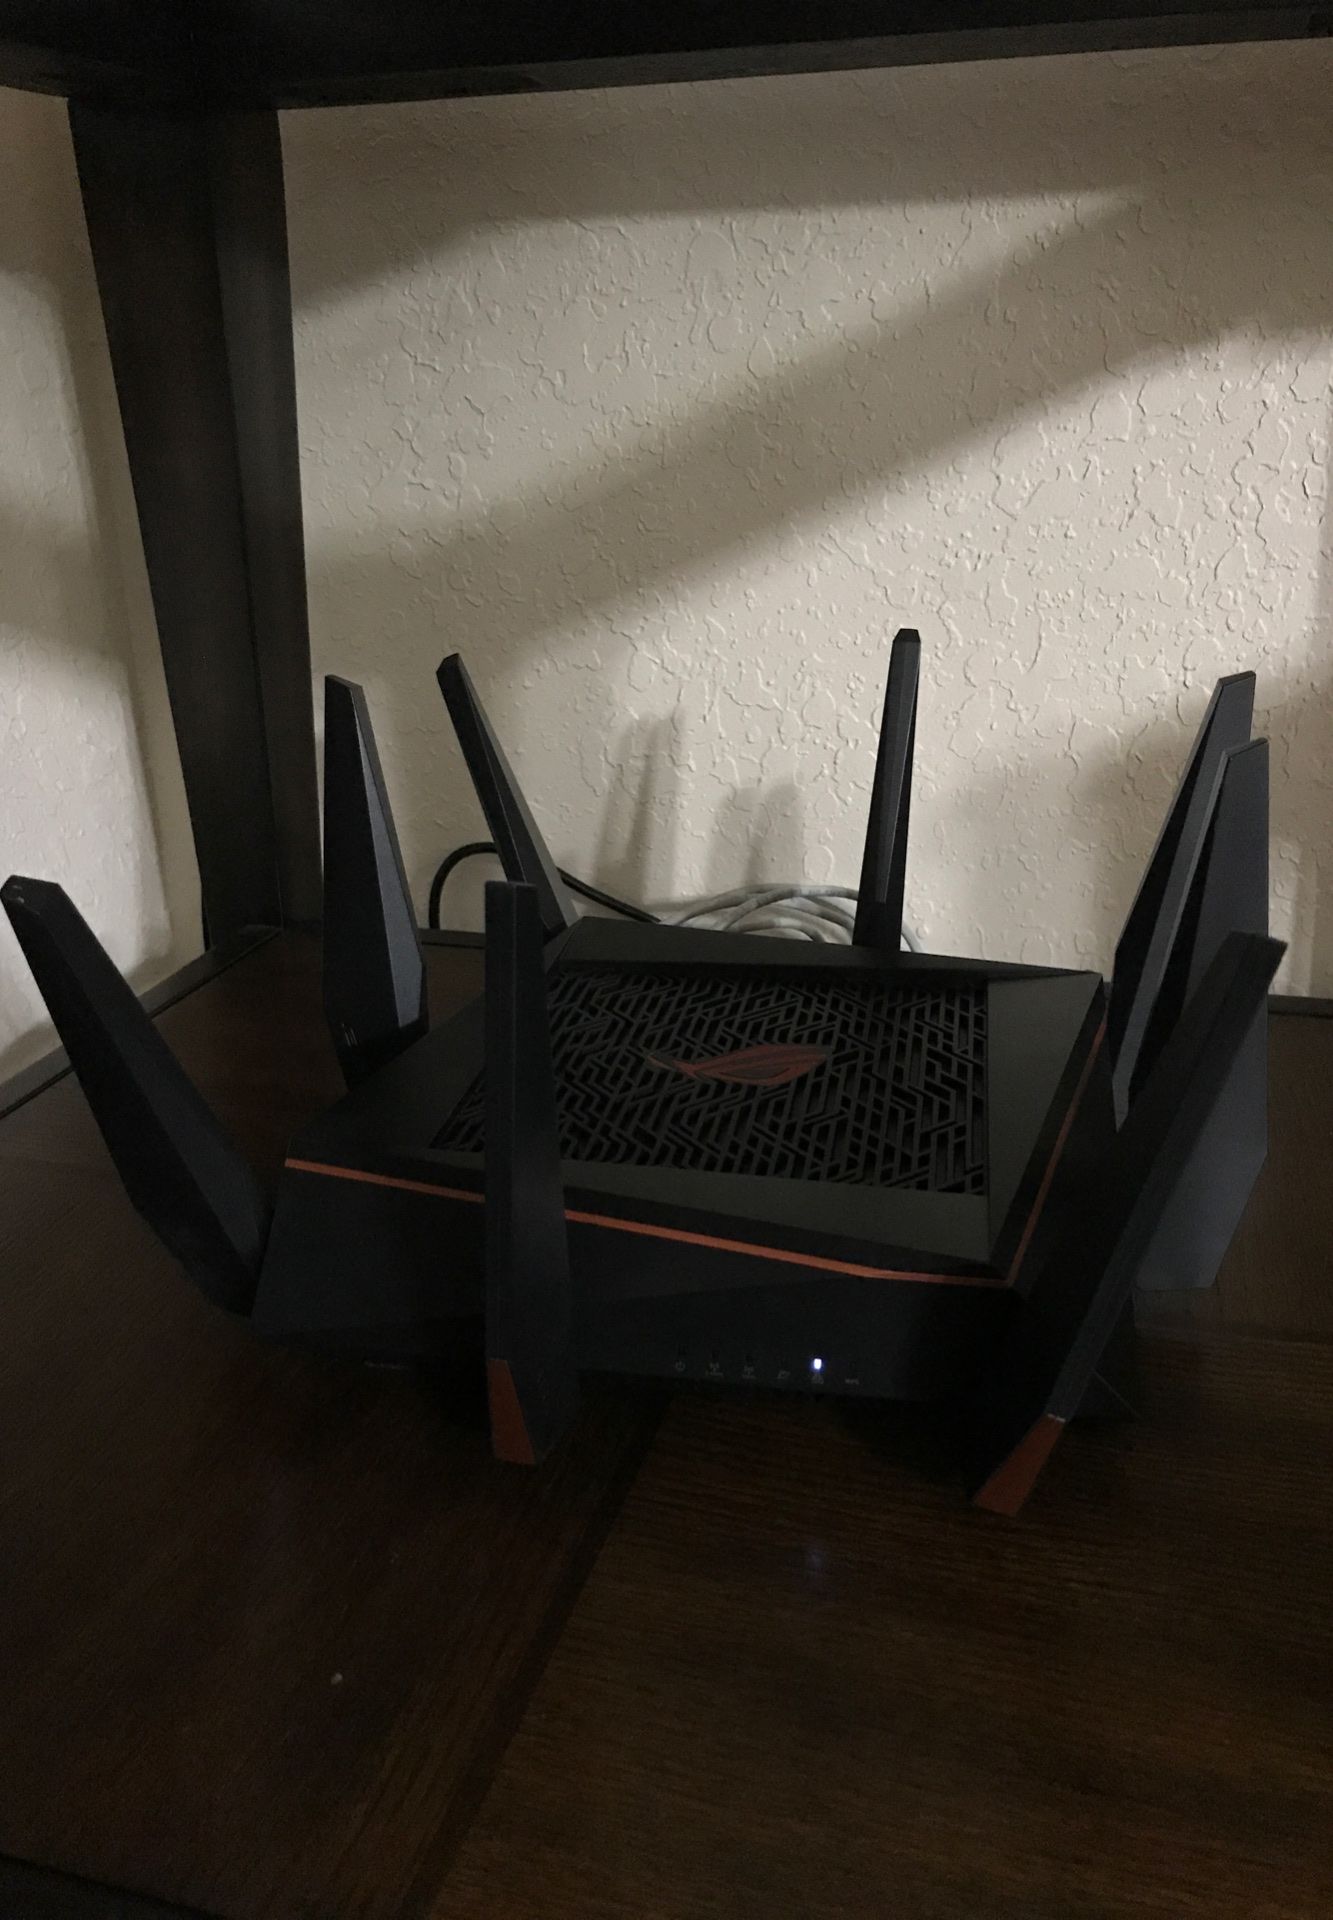 ASUS ROG GT-AC5300 WiFi Router